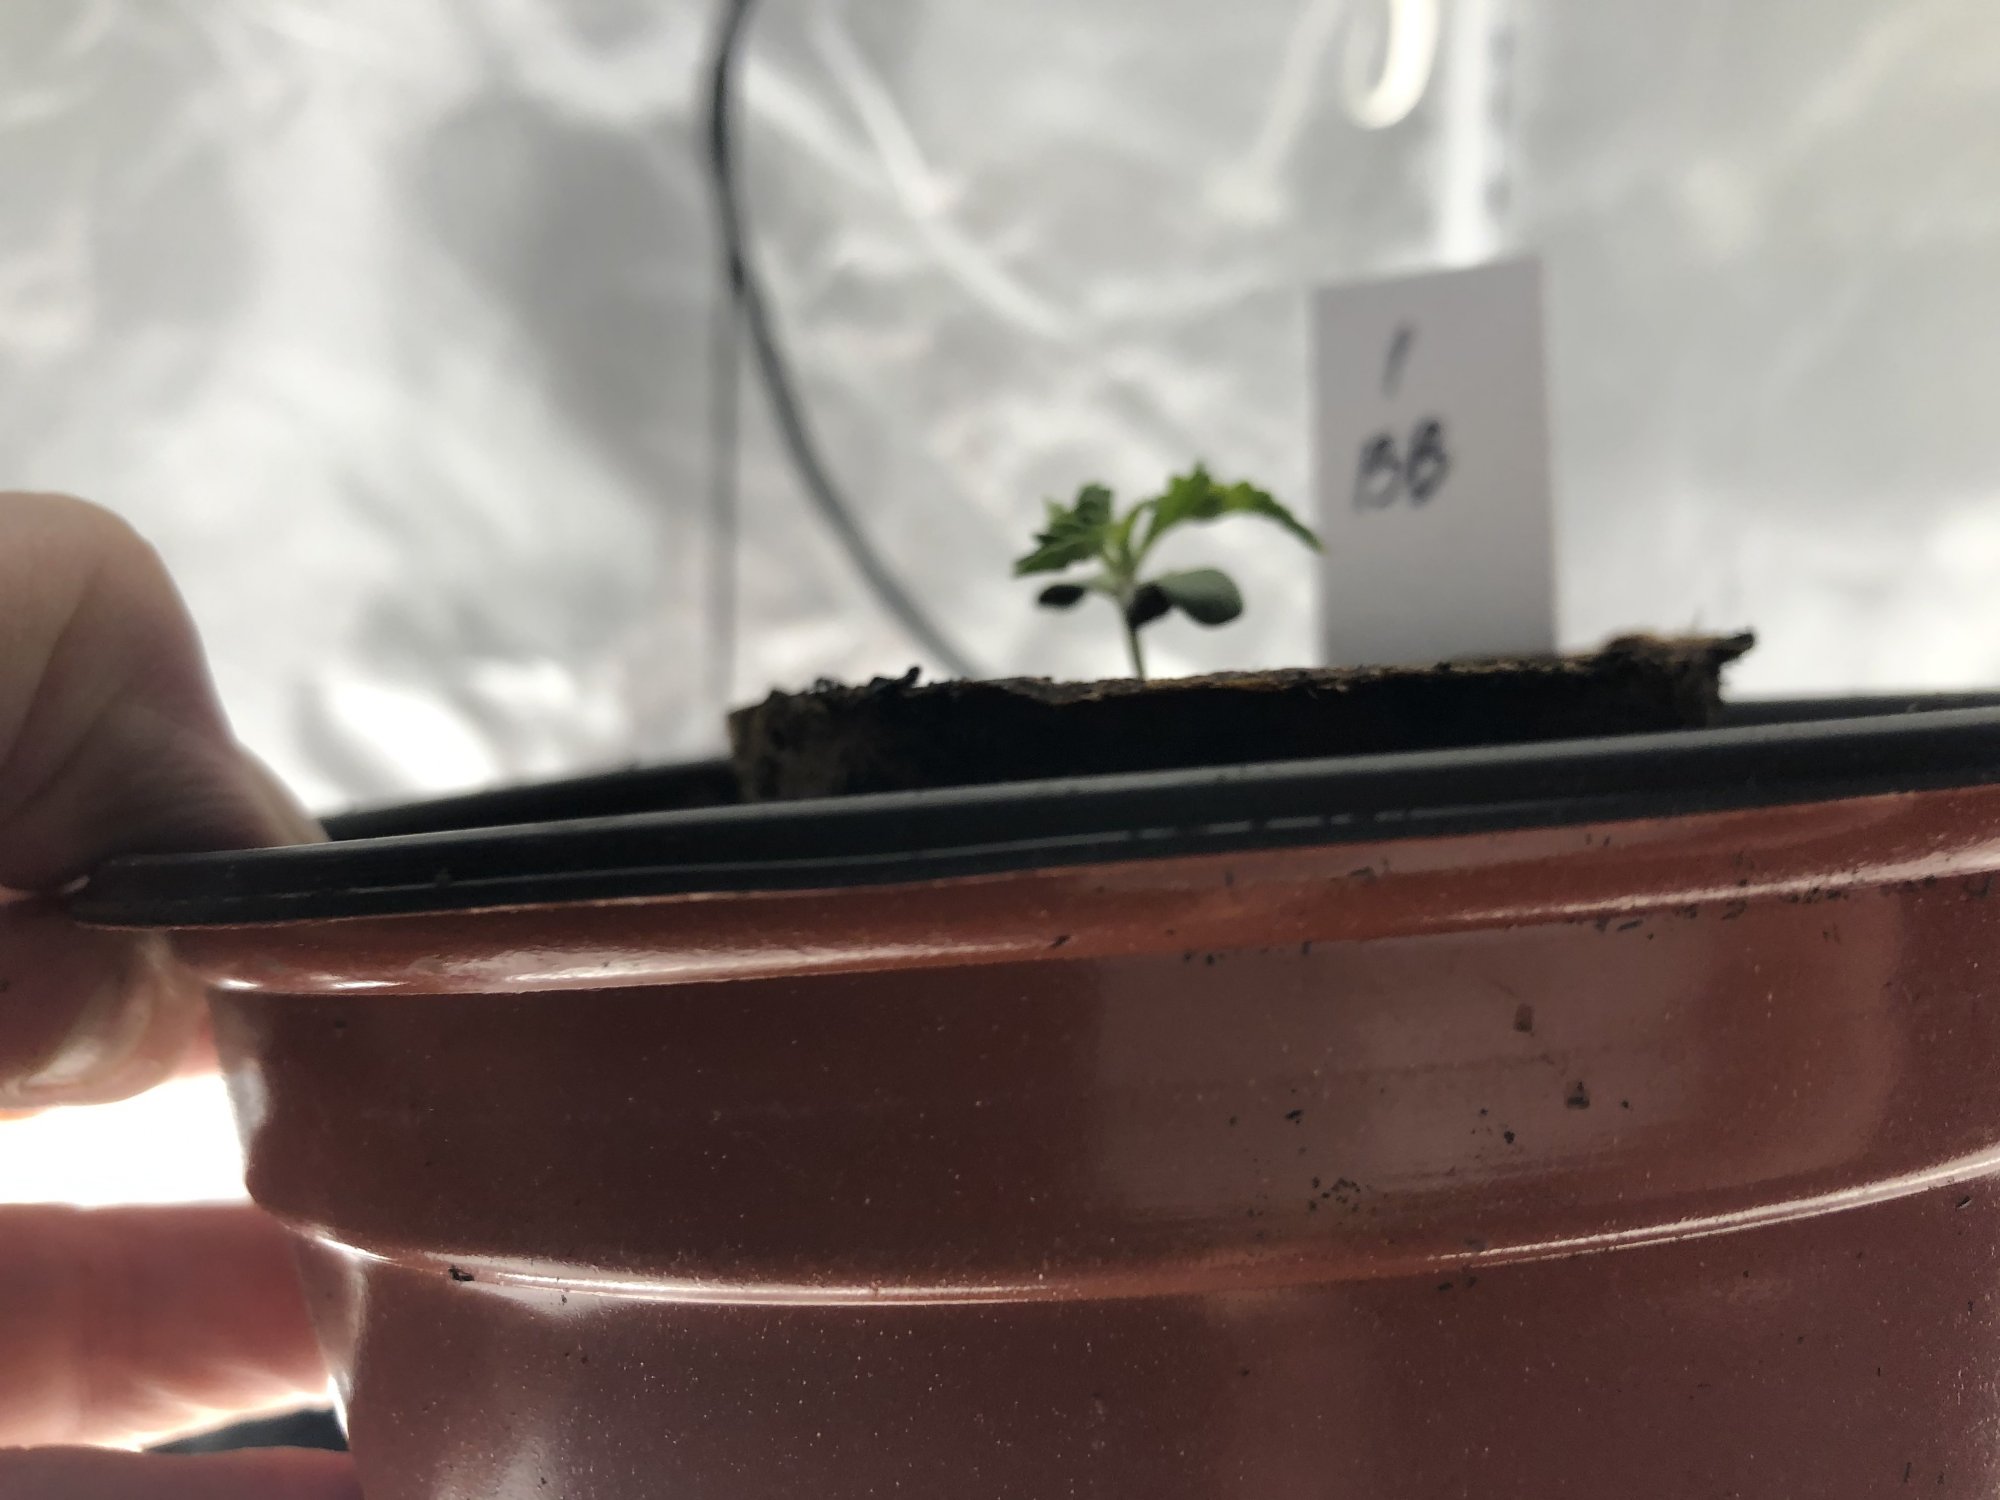 First indoor grow and my plants took terrible why 4